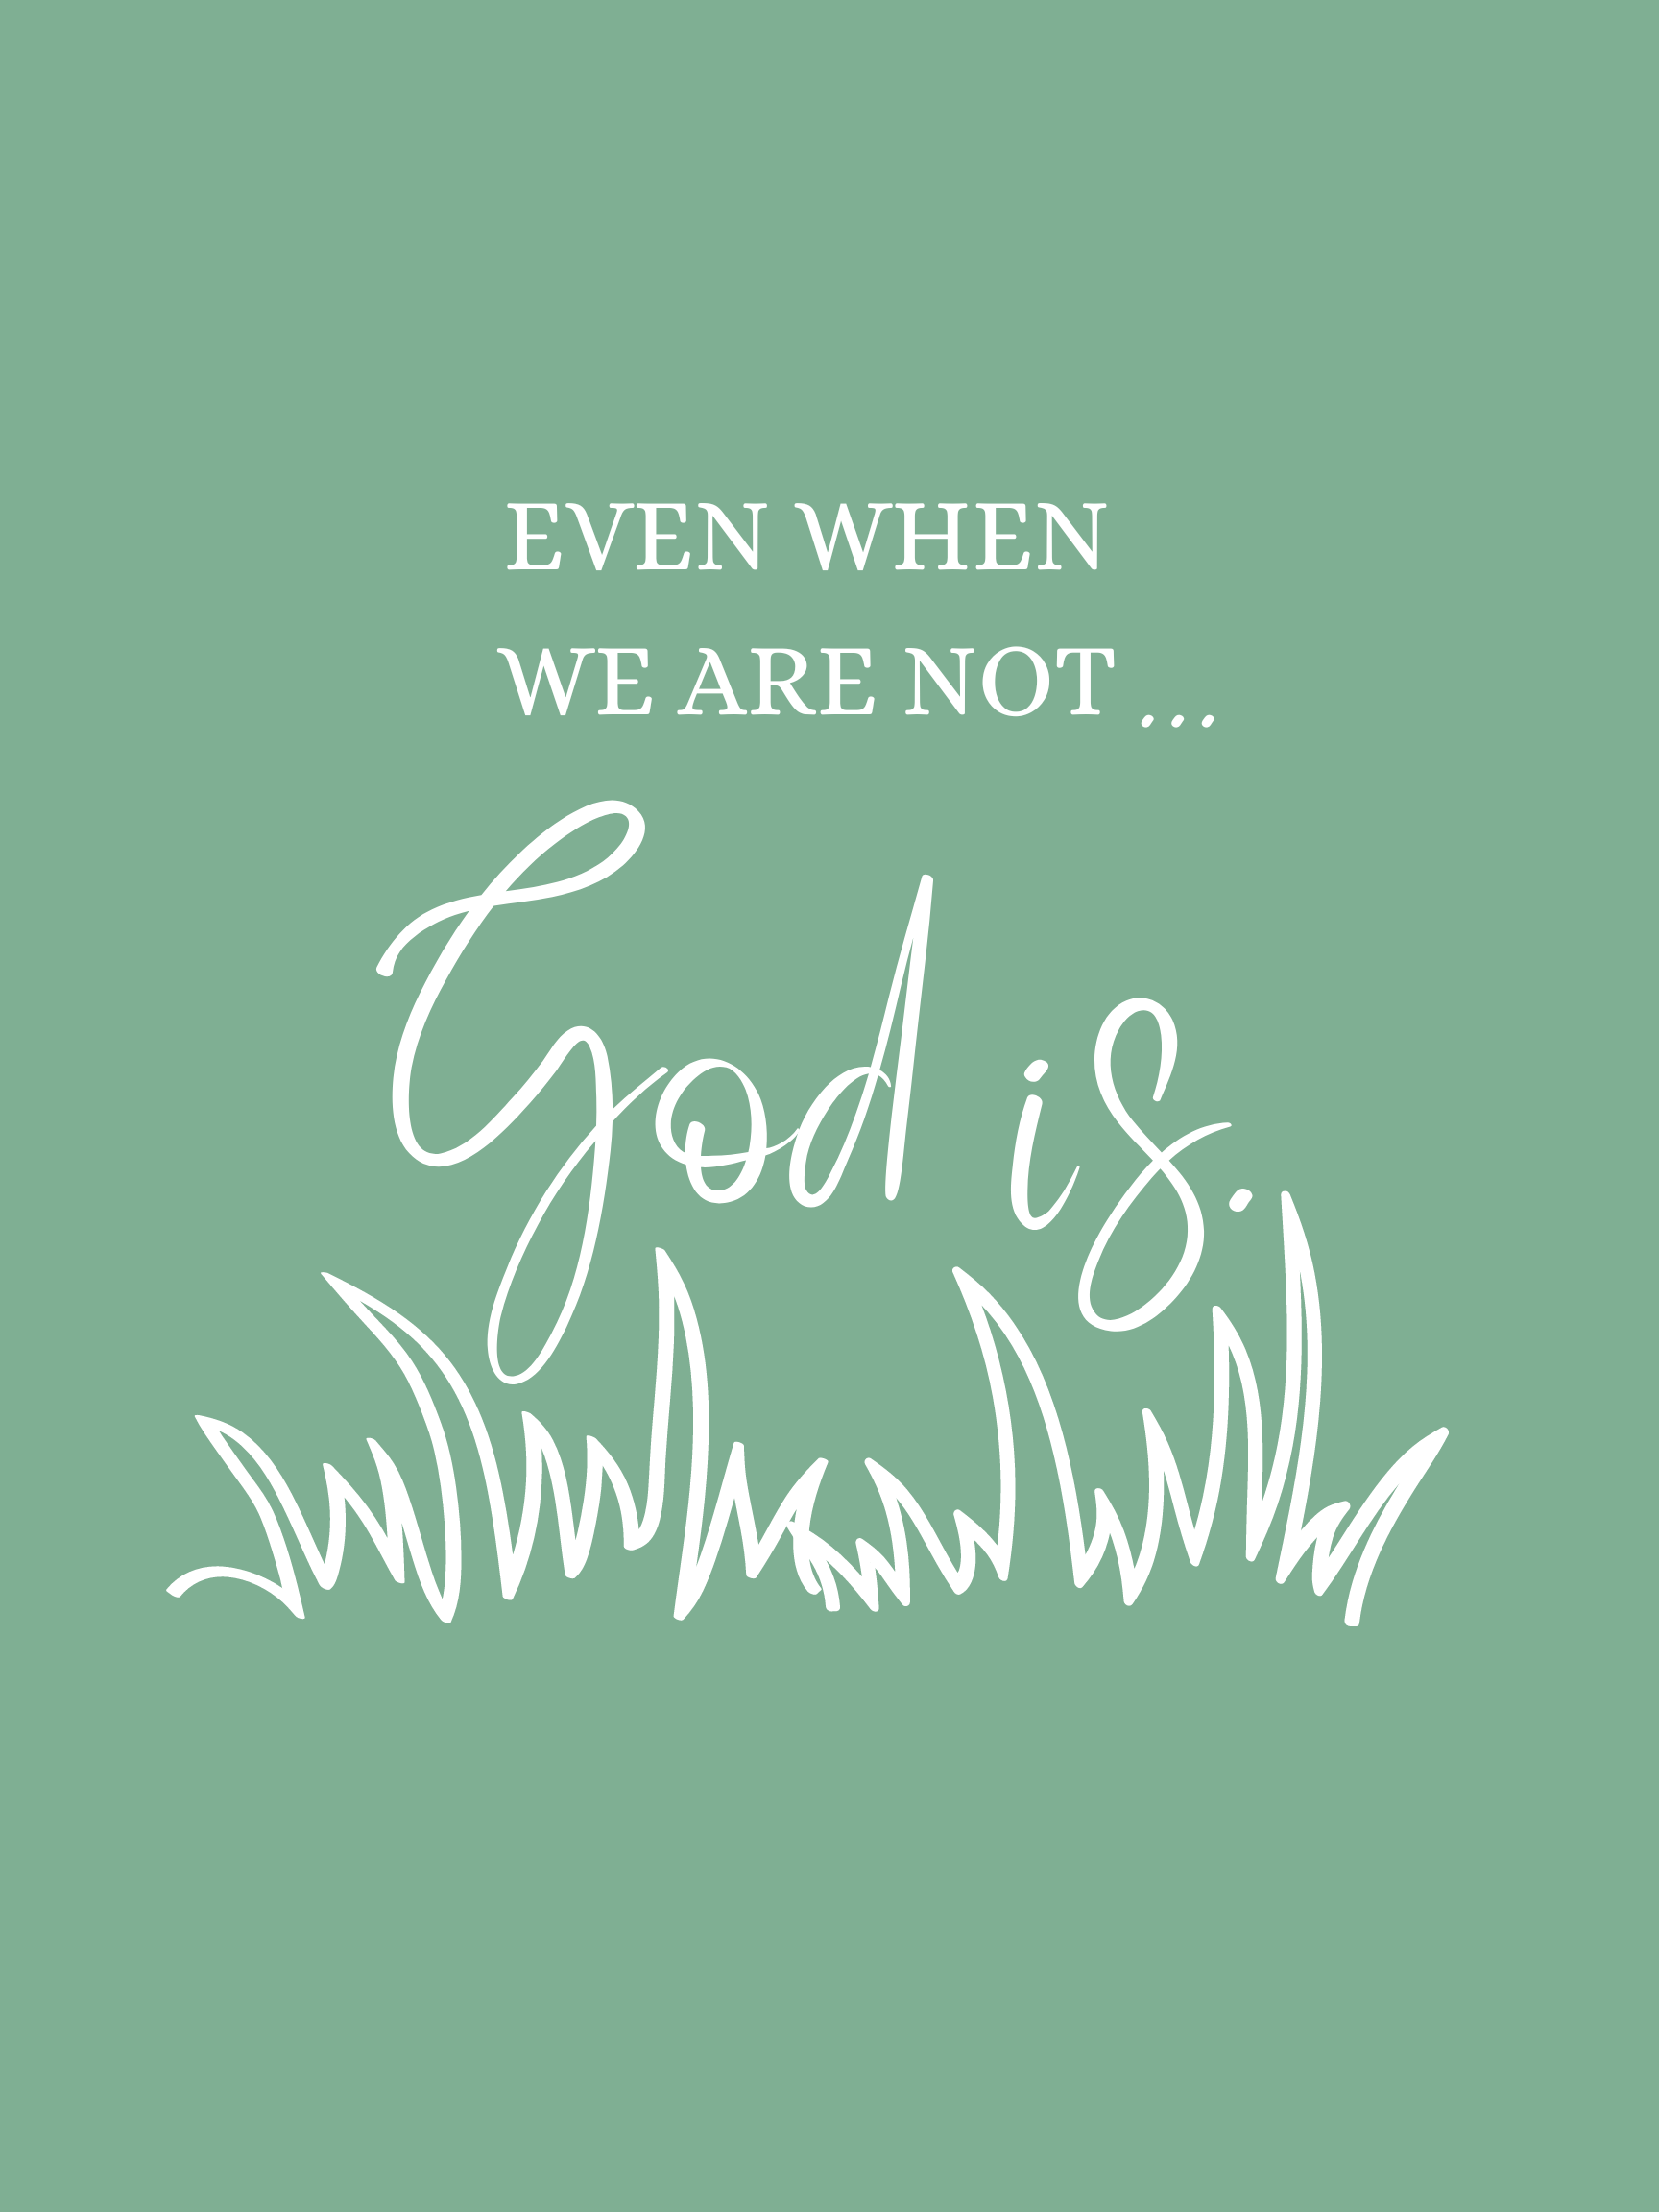 Even when god is not...